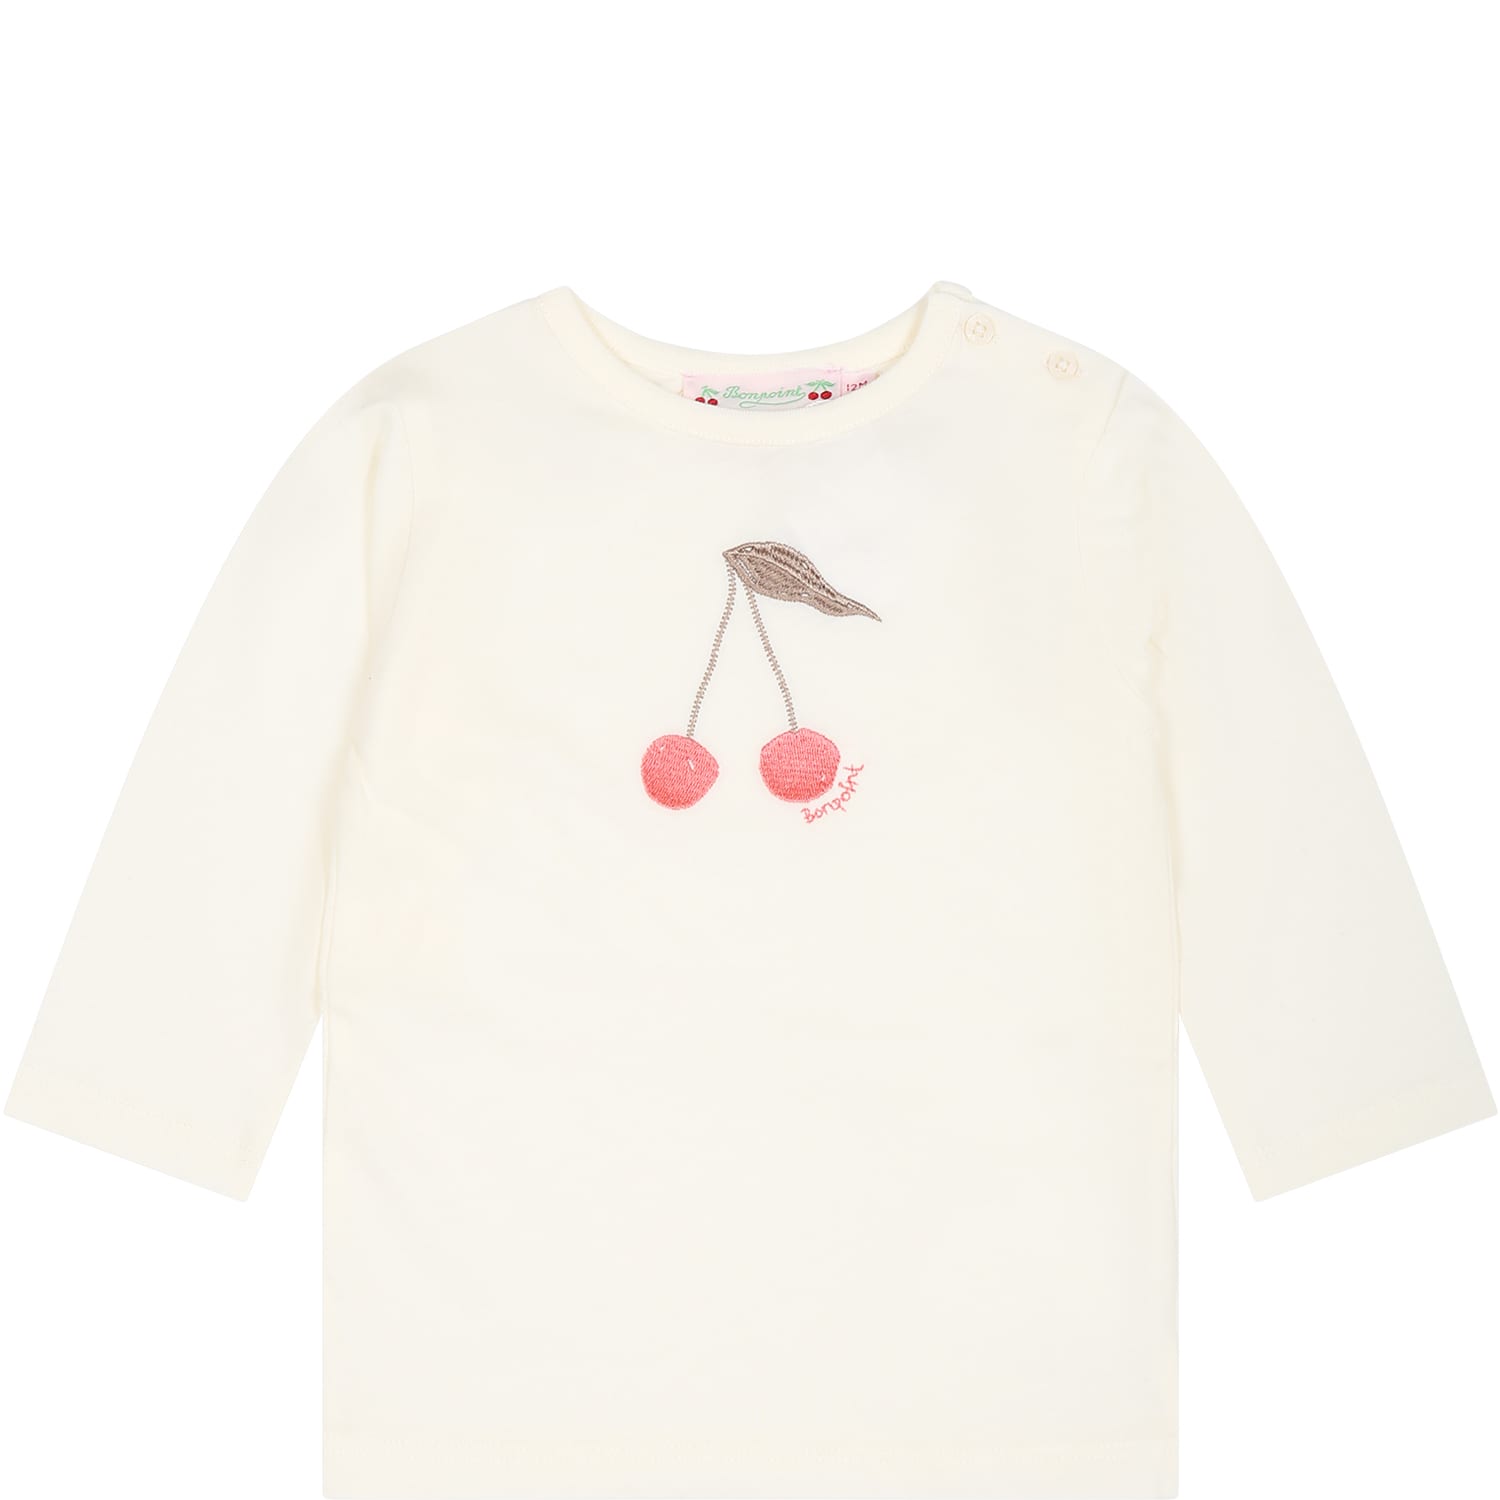 BONPOINT IVORY T-SHIRT FOR BABY GIRL WITH LOGO